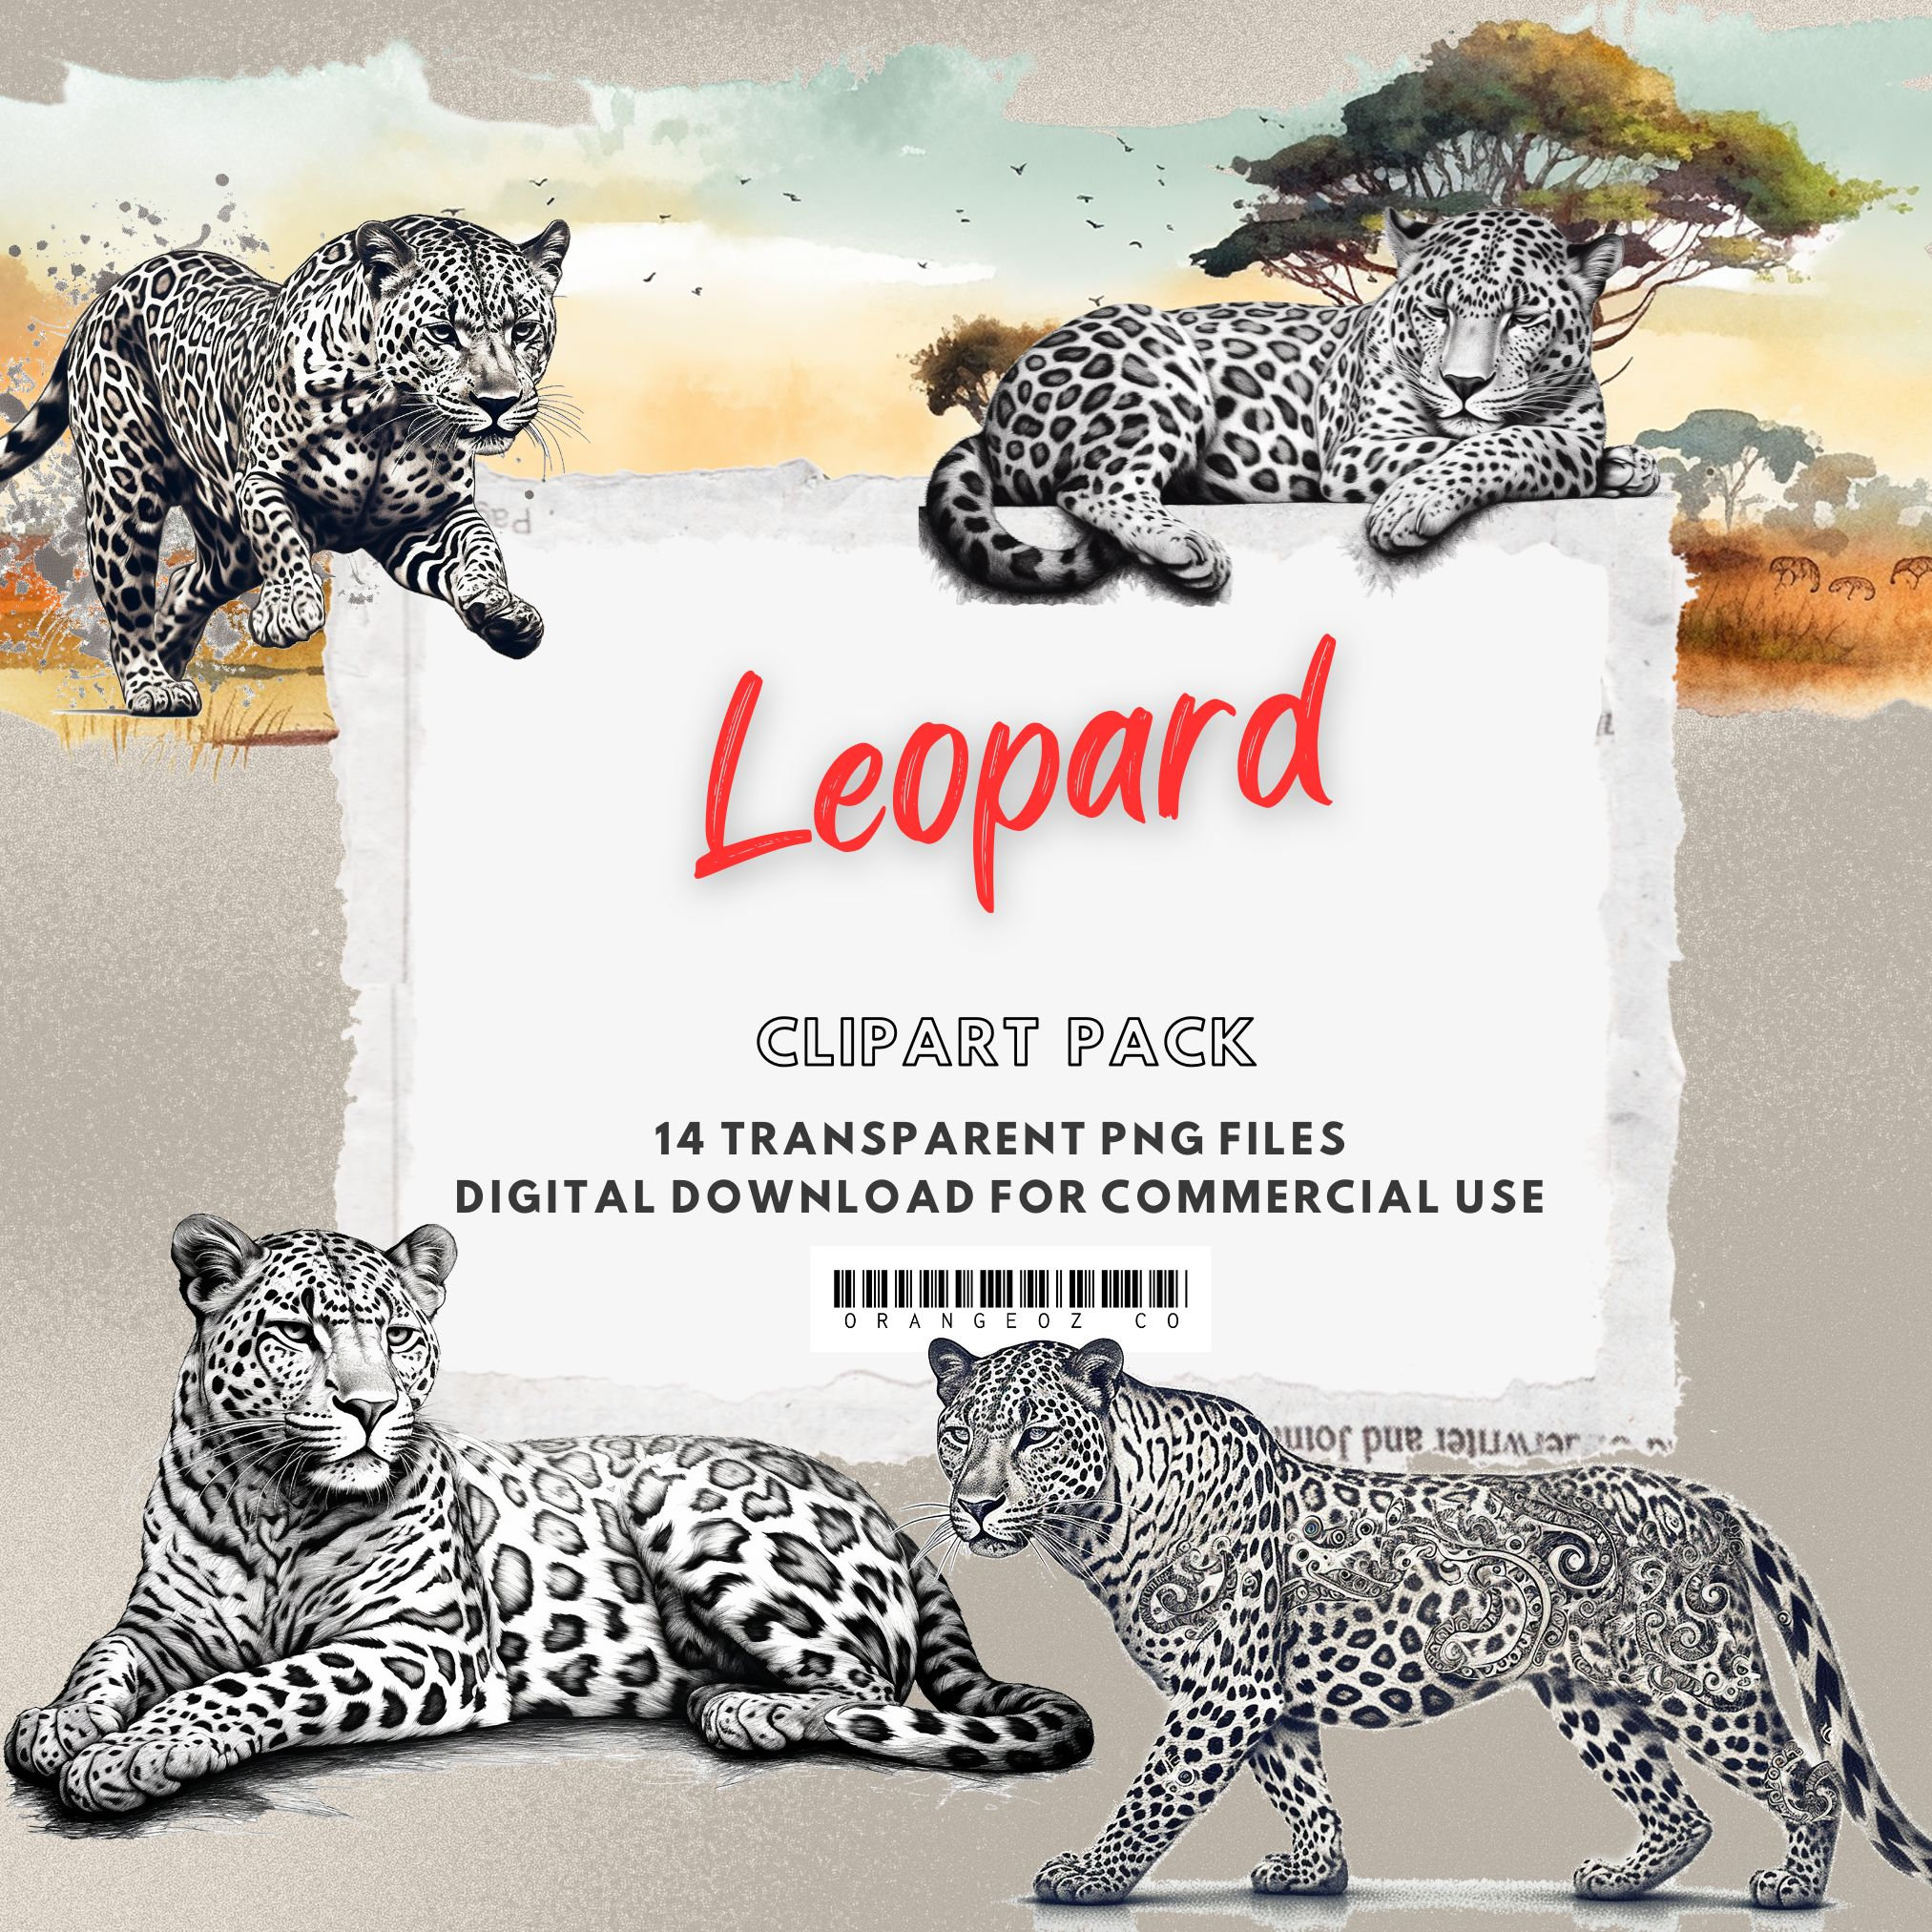 Lively Leopard Instant Facepaint Transfer Tattoo 2 Copies 